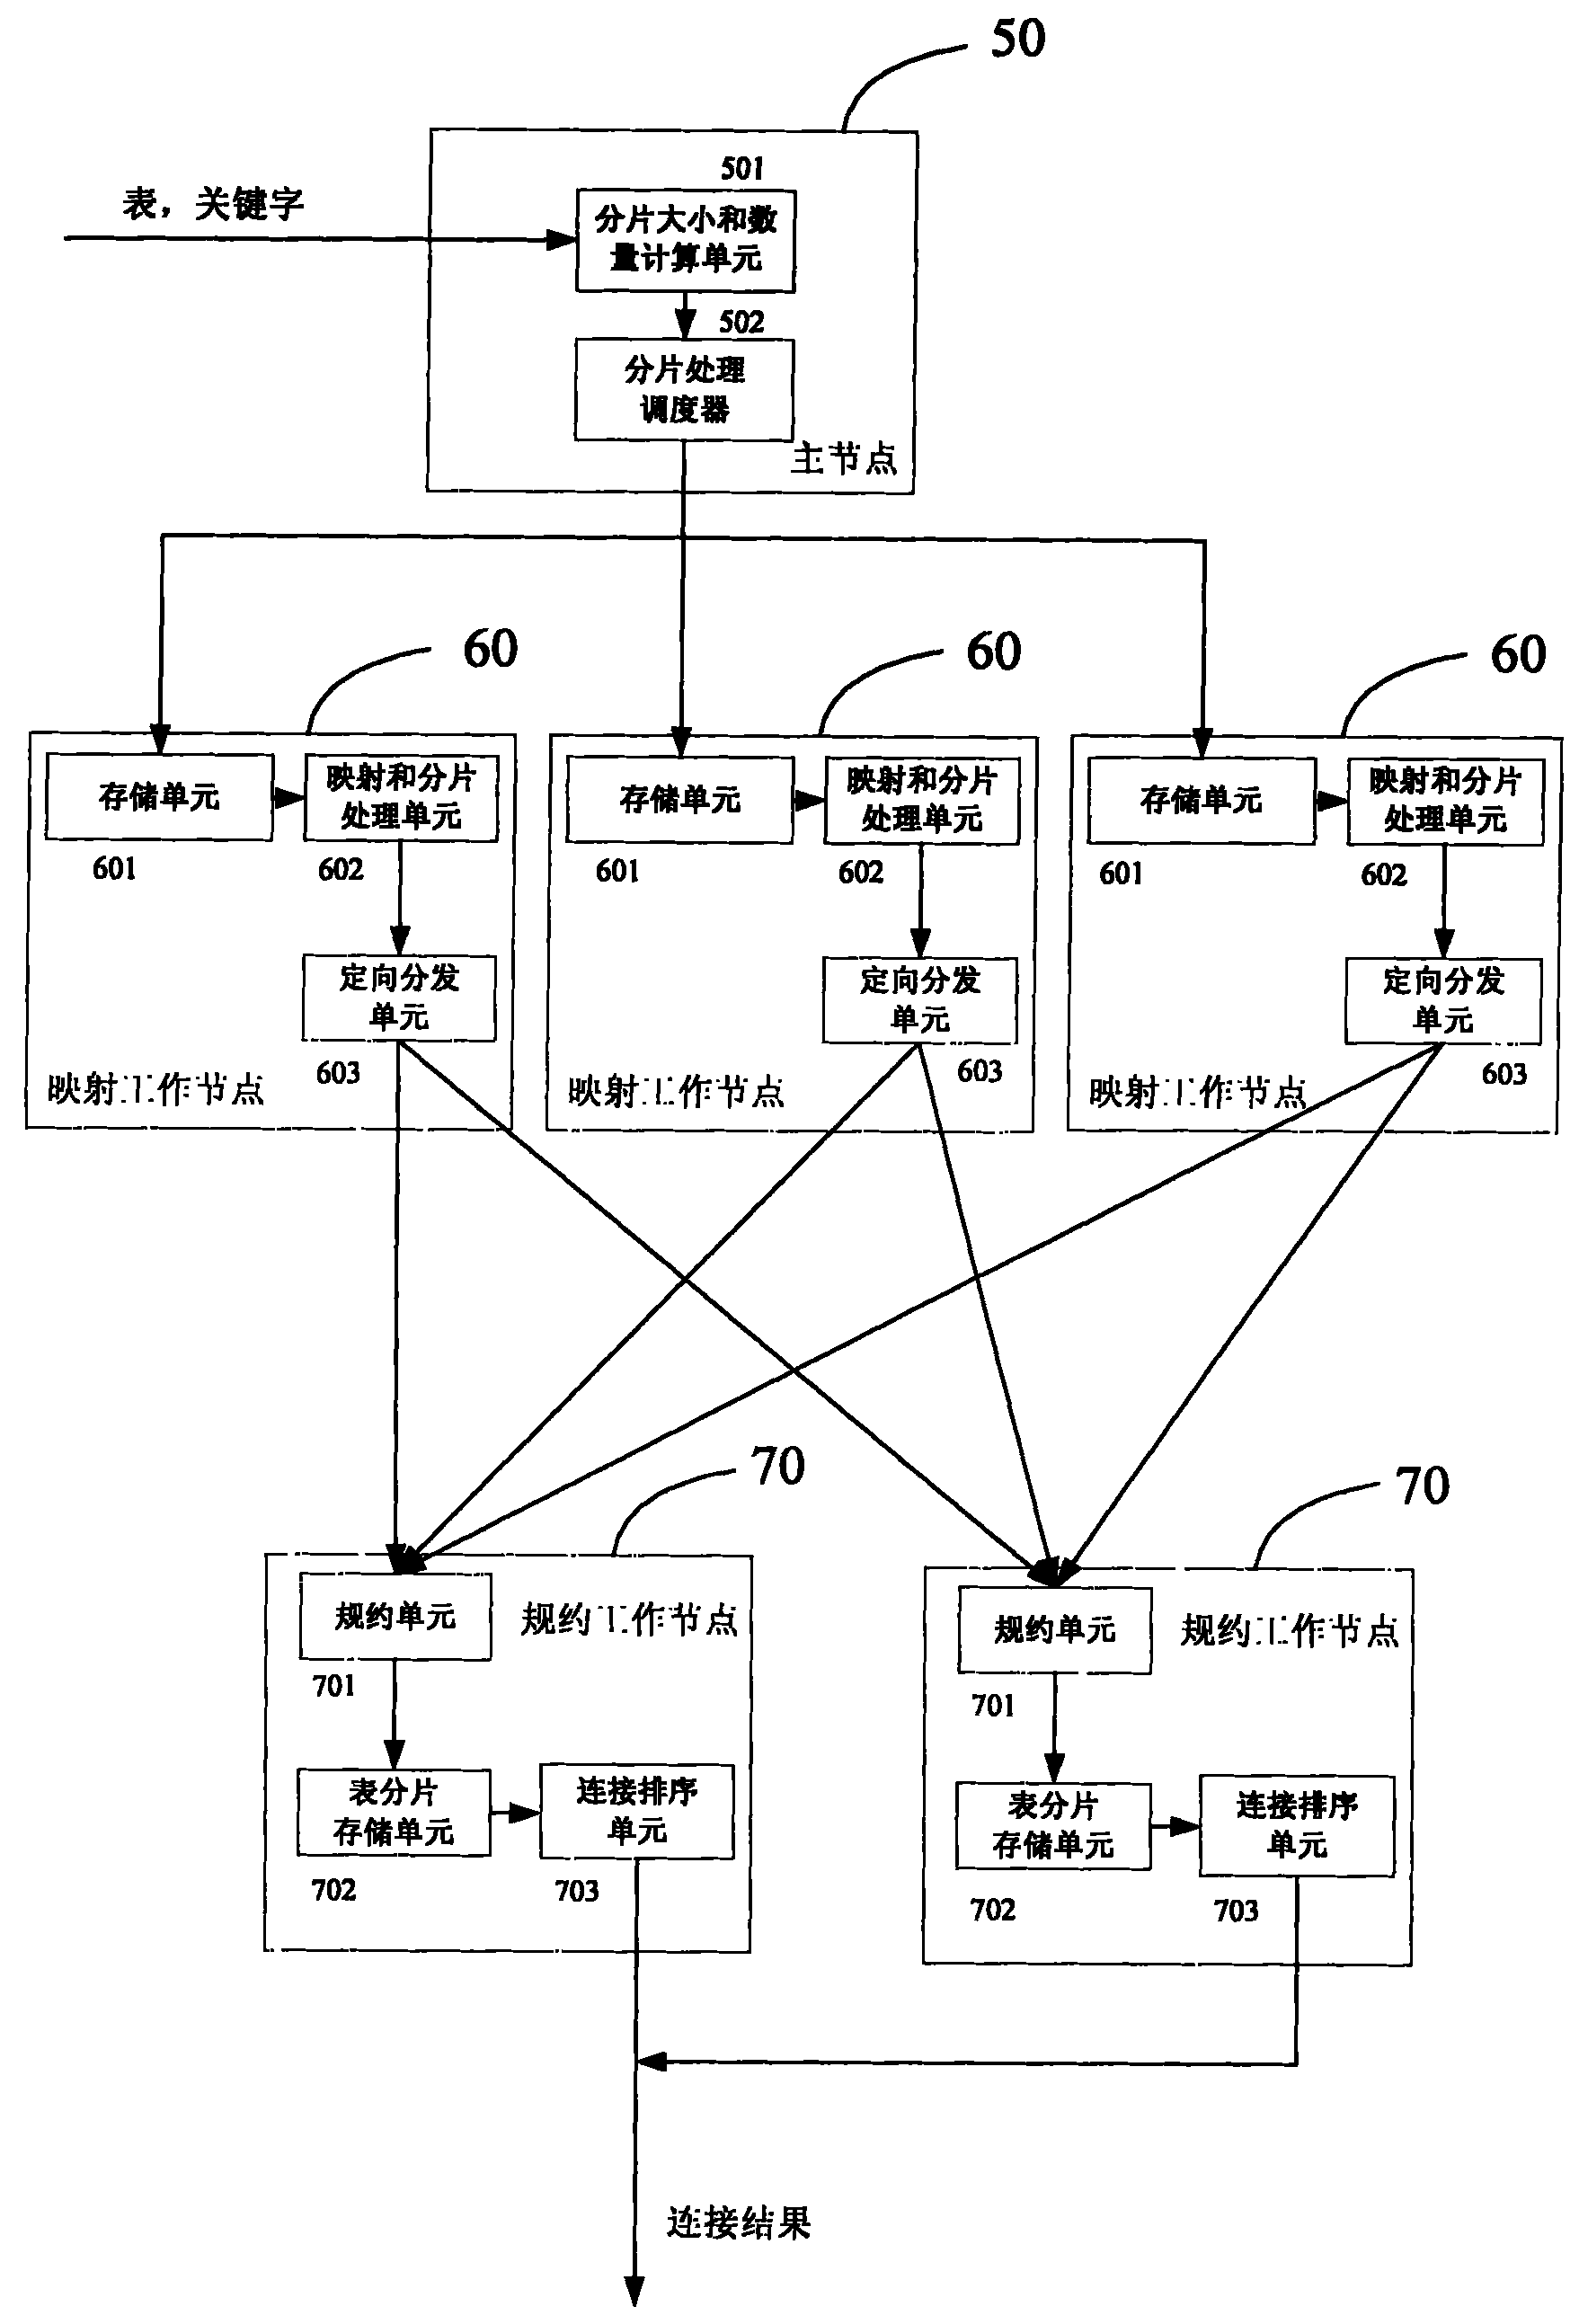 Connection query system and method for distributed data warehouse